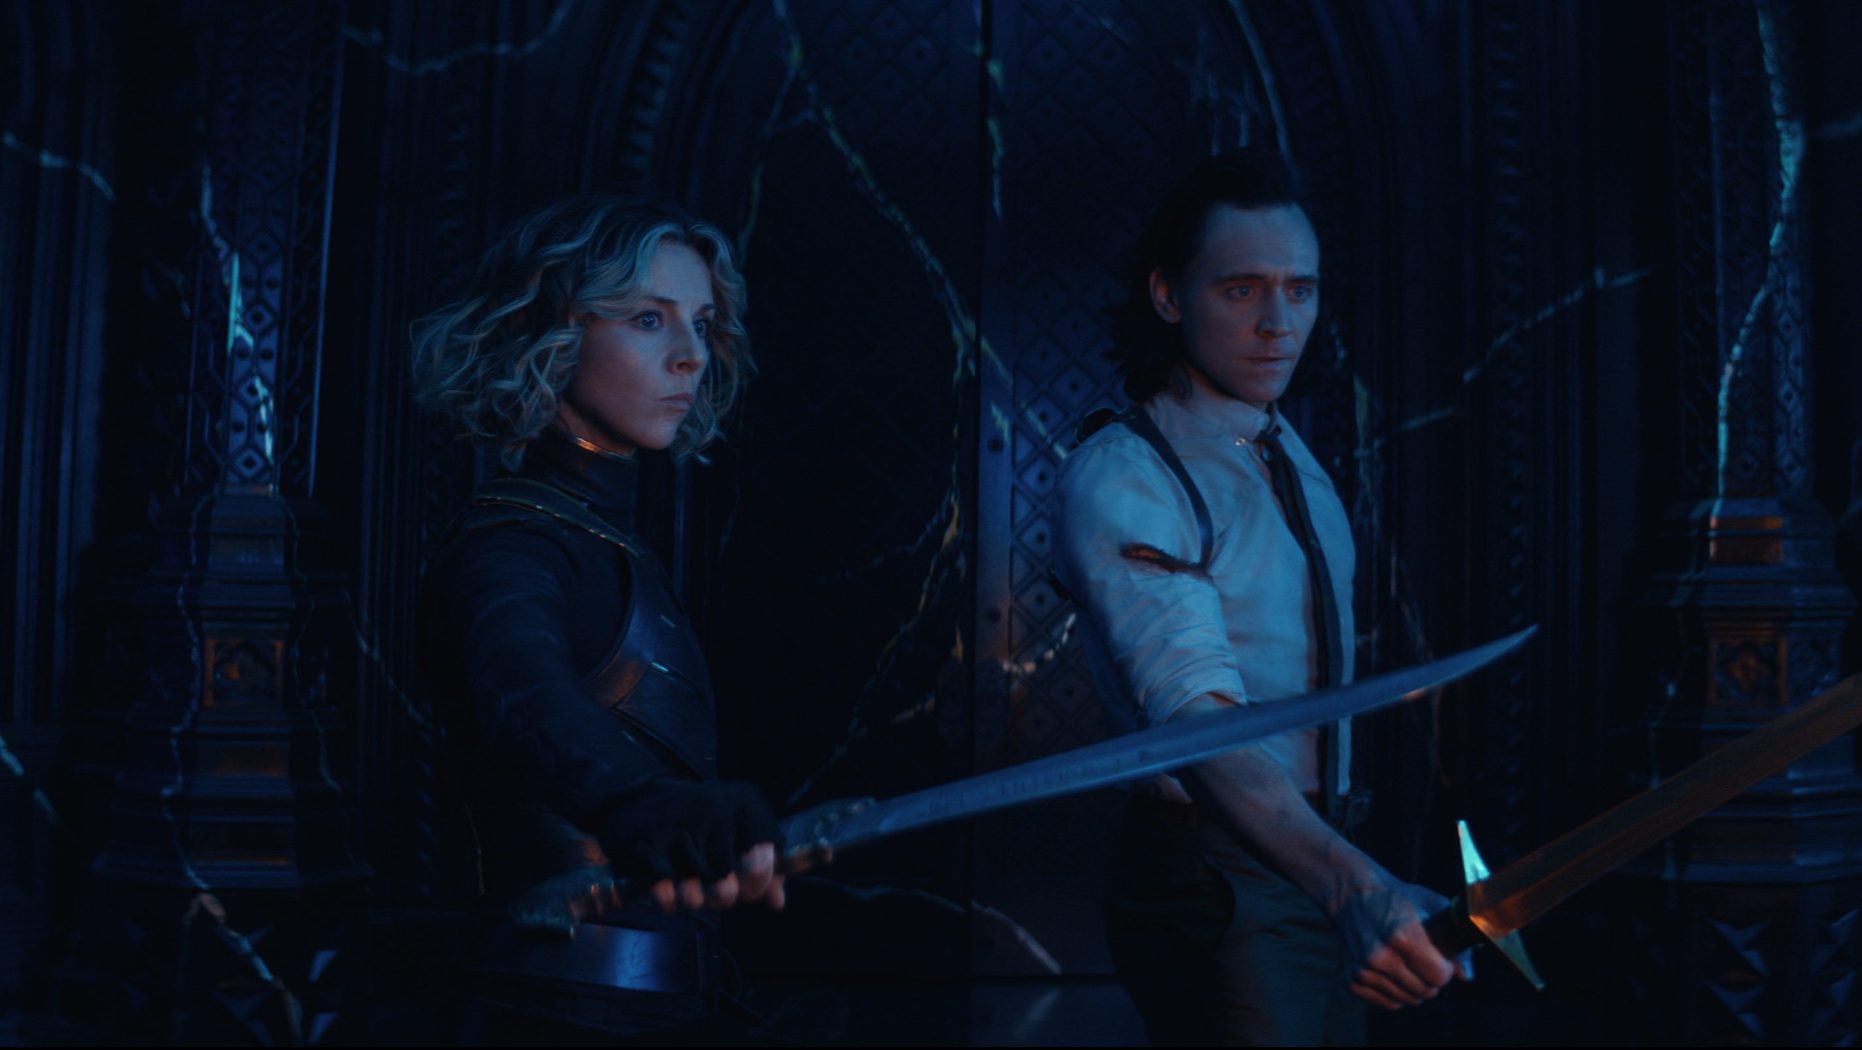 Loki TV series sees Loki (Tom Hiddleston) and Sylvie (Sophia Di Martino) holding out knives and learning who's behind the TVA, leaving questions for Season 2